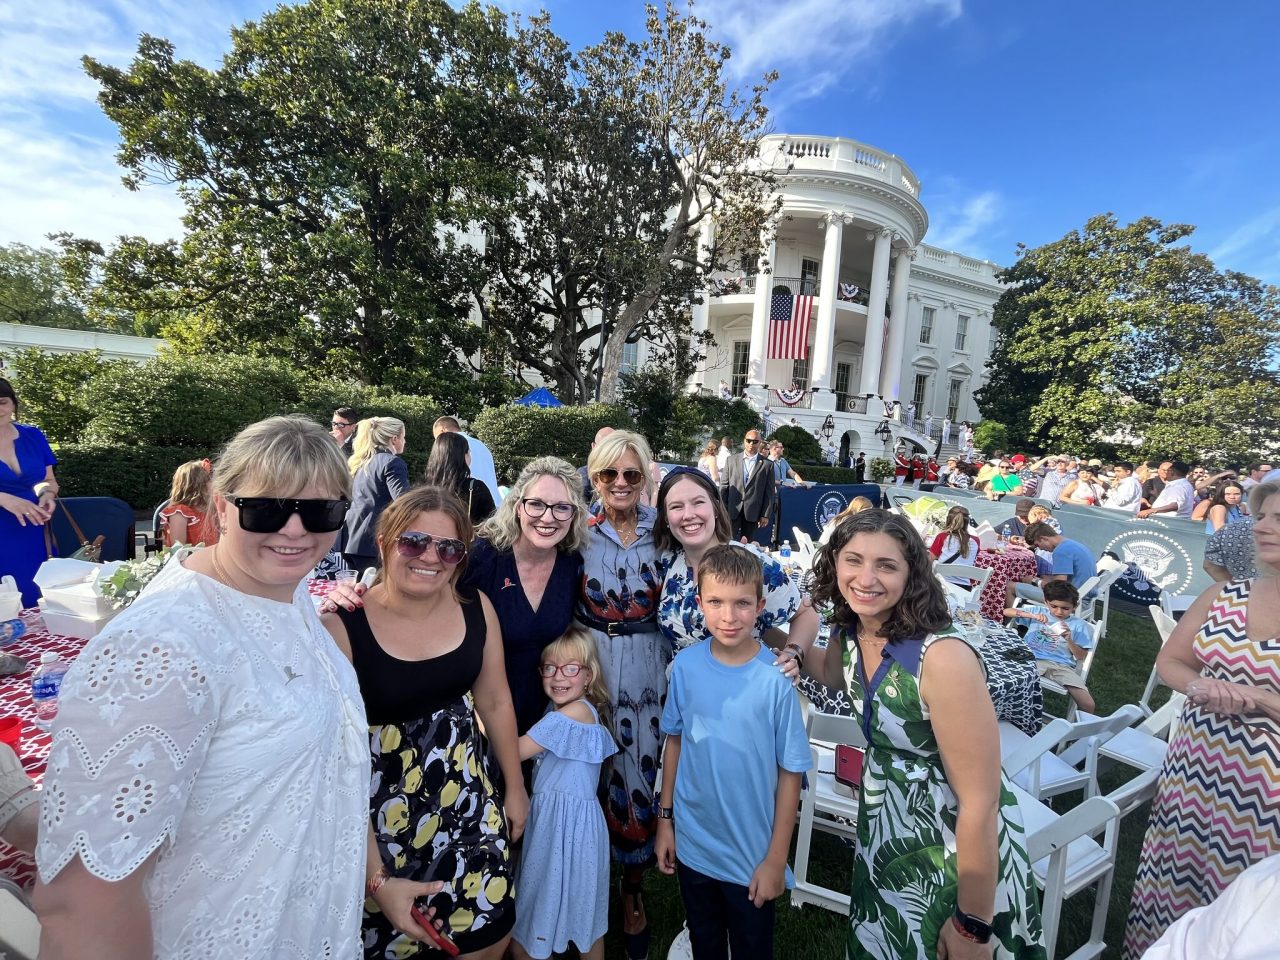 It was a special Fourth of July for some former St. Jude patients and their families from Ukraine